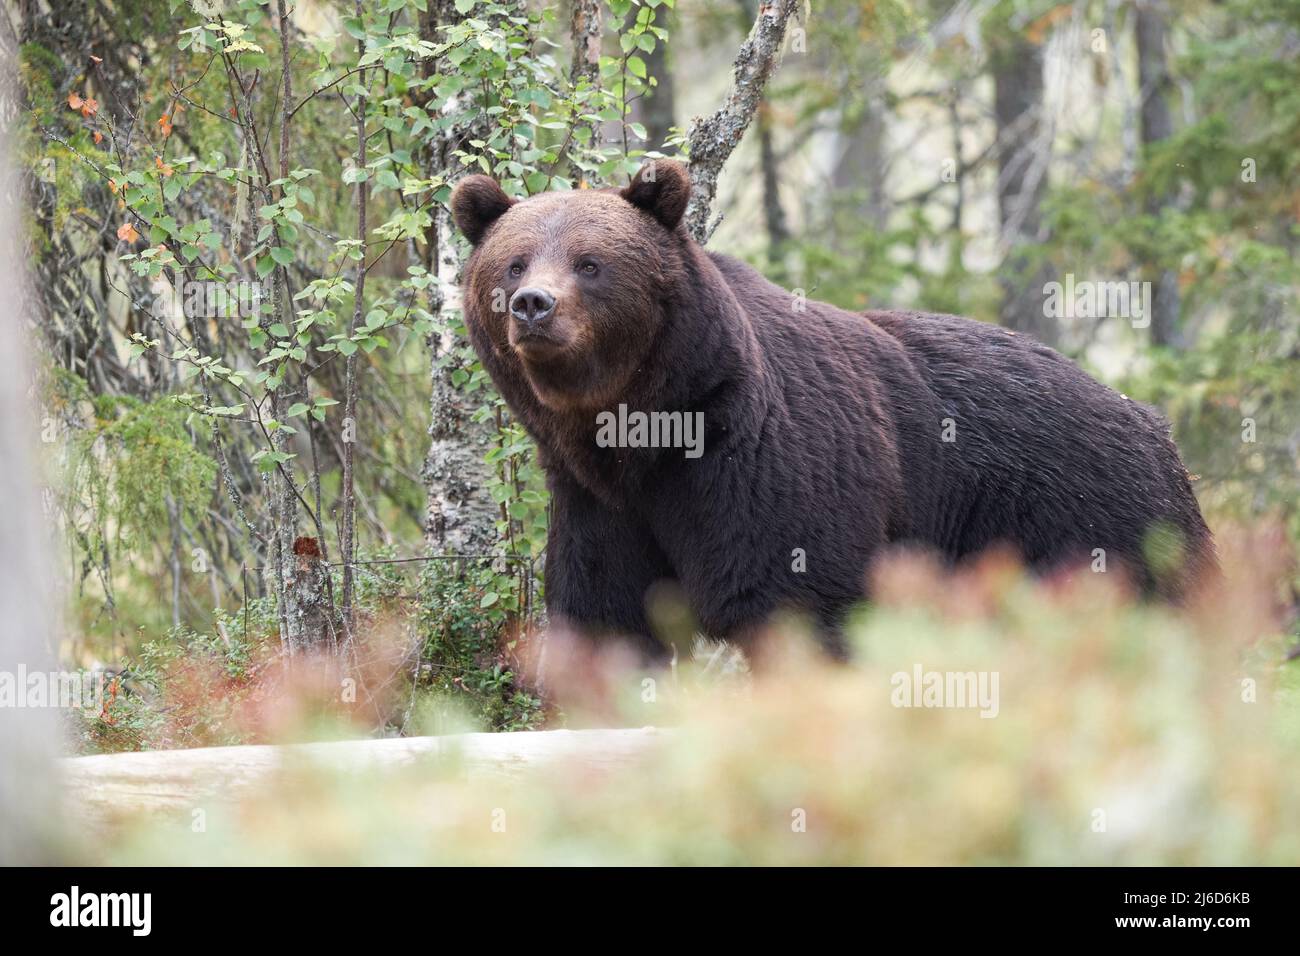 A brown bear in the forest Stock Photo